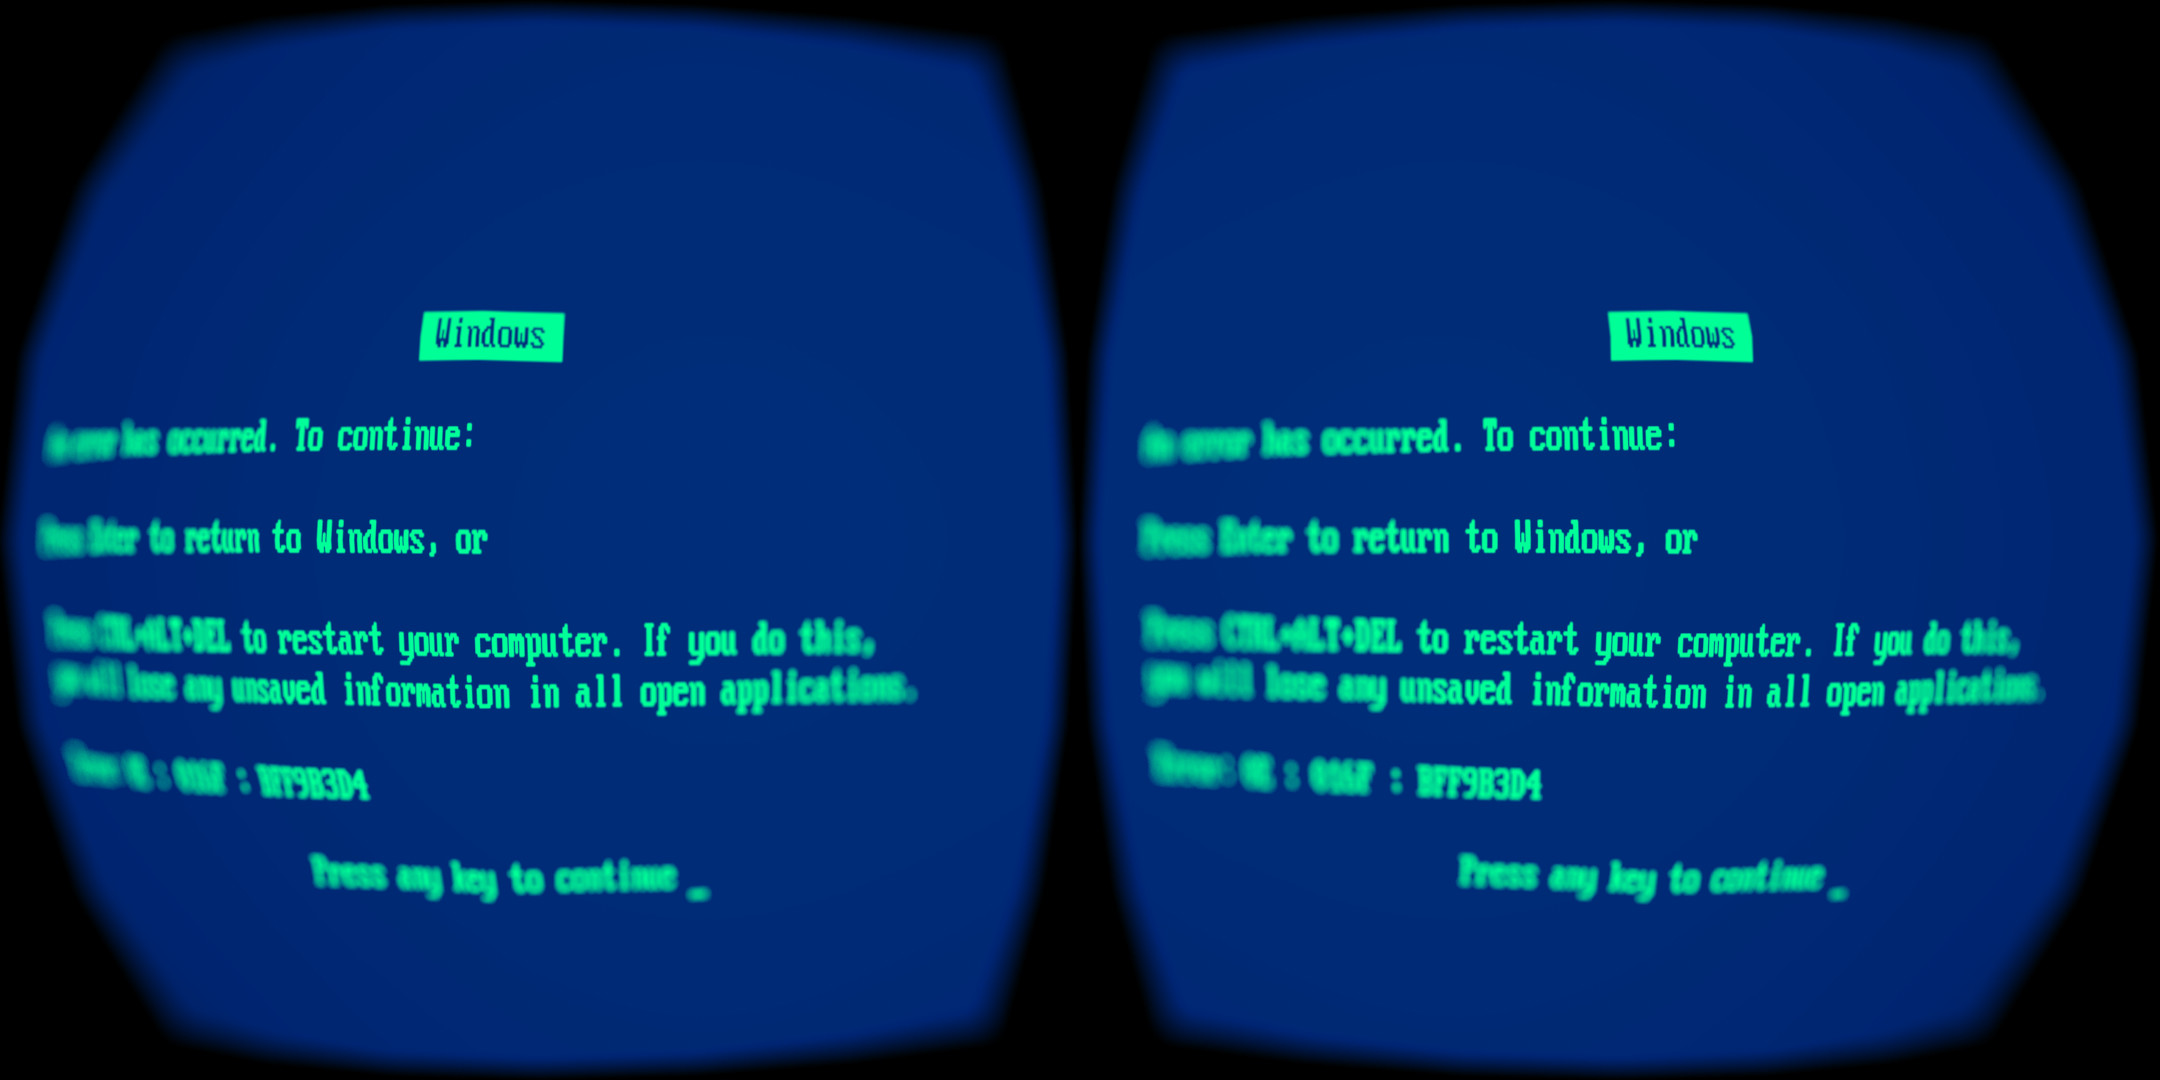 the view through VR googles showing a "blue screen" error message